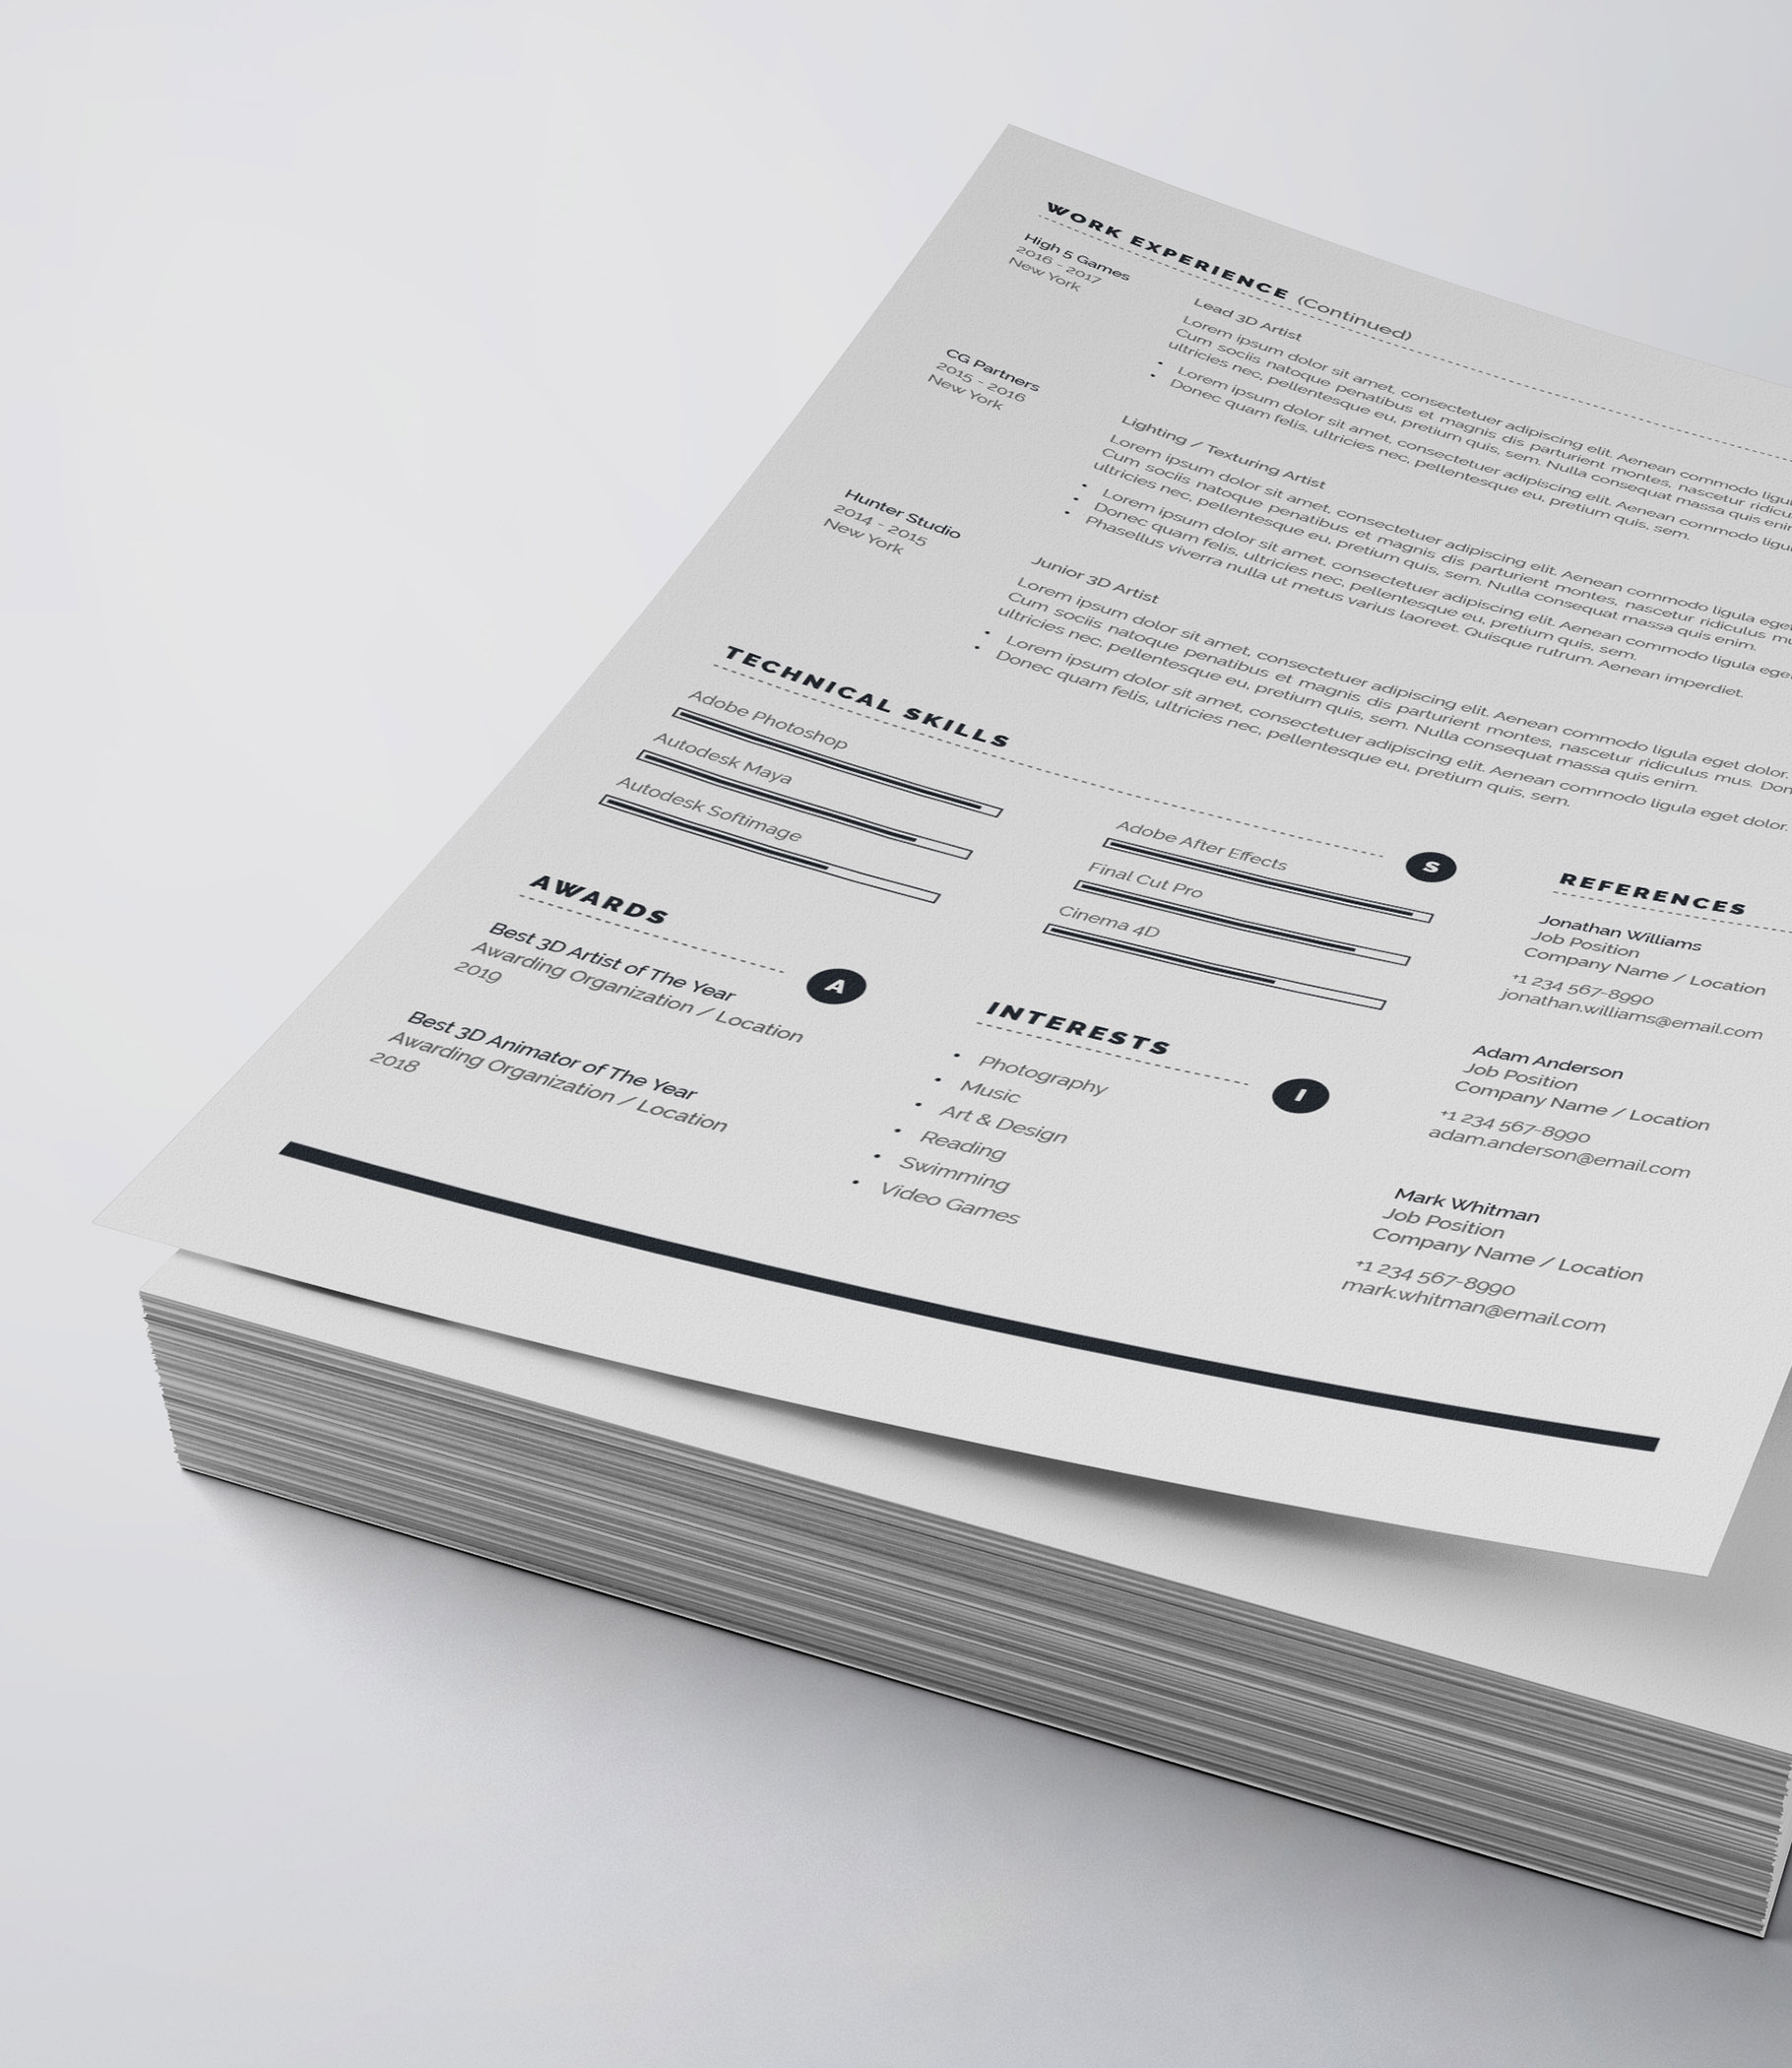 White and black resume on top of a stack of papers.